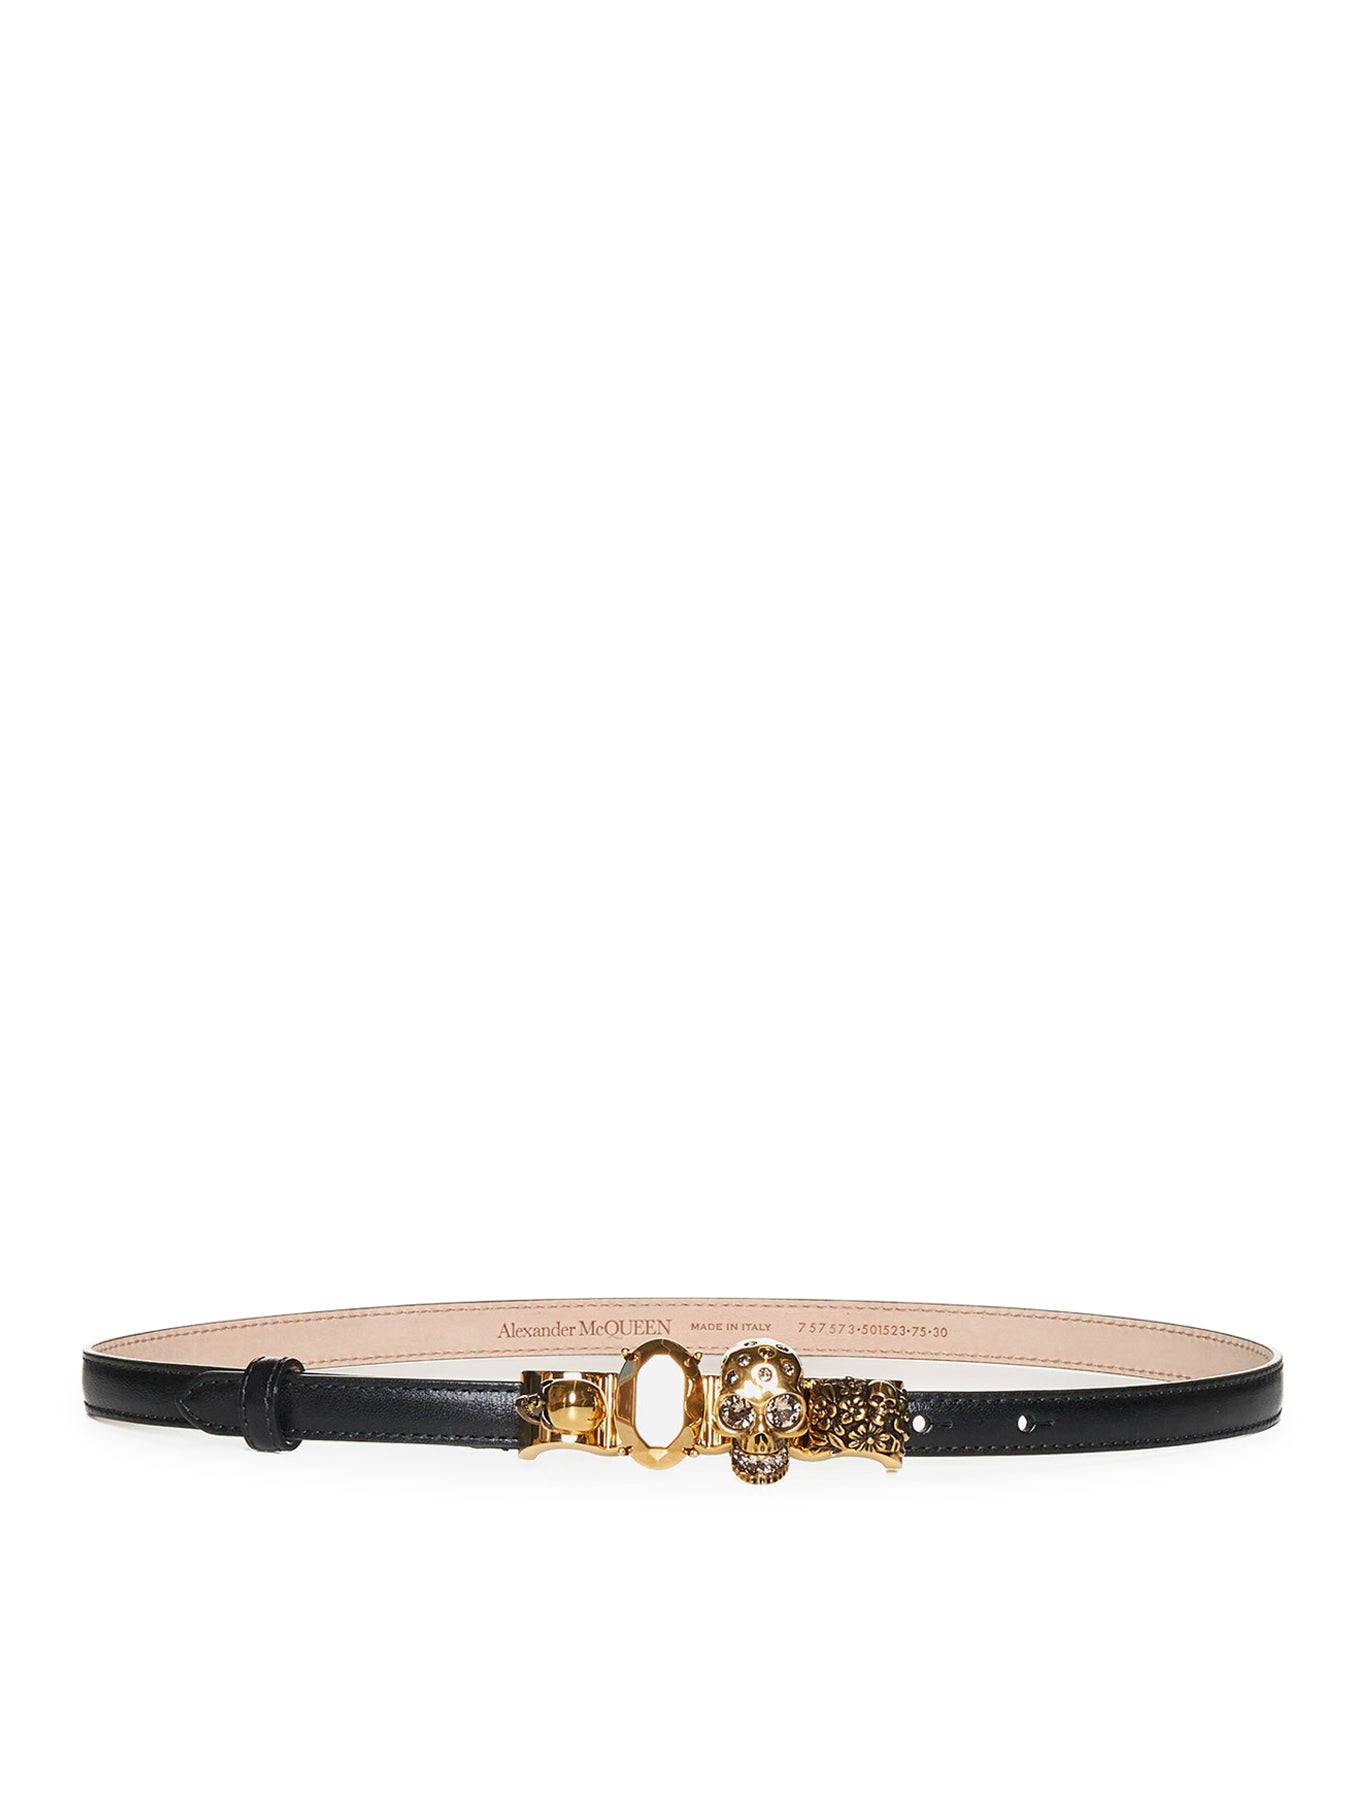 The Knuckle leather belt